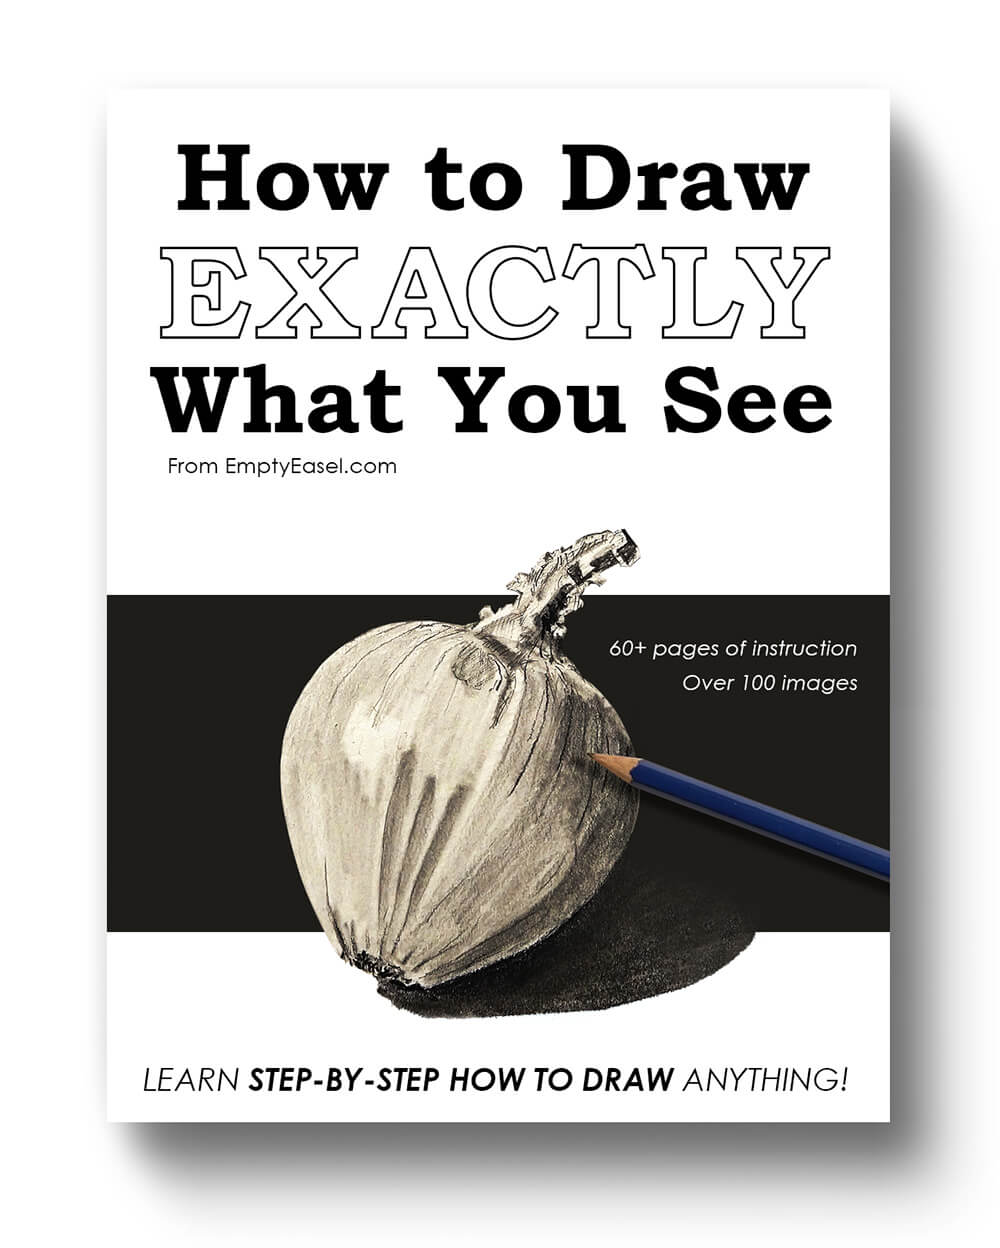 How to Draw EXACTLY What You See